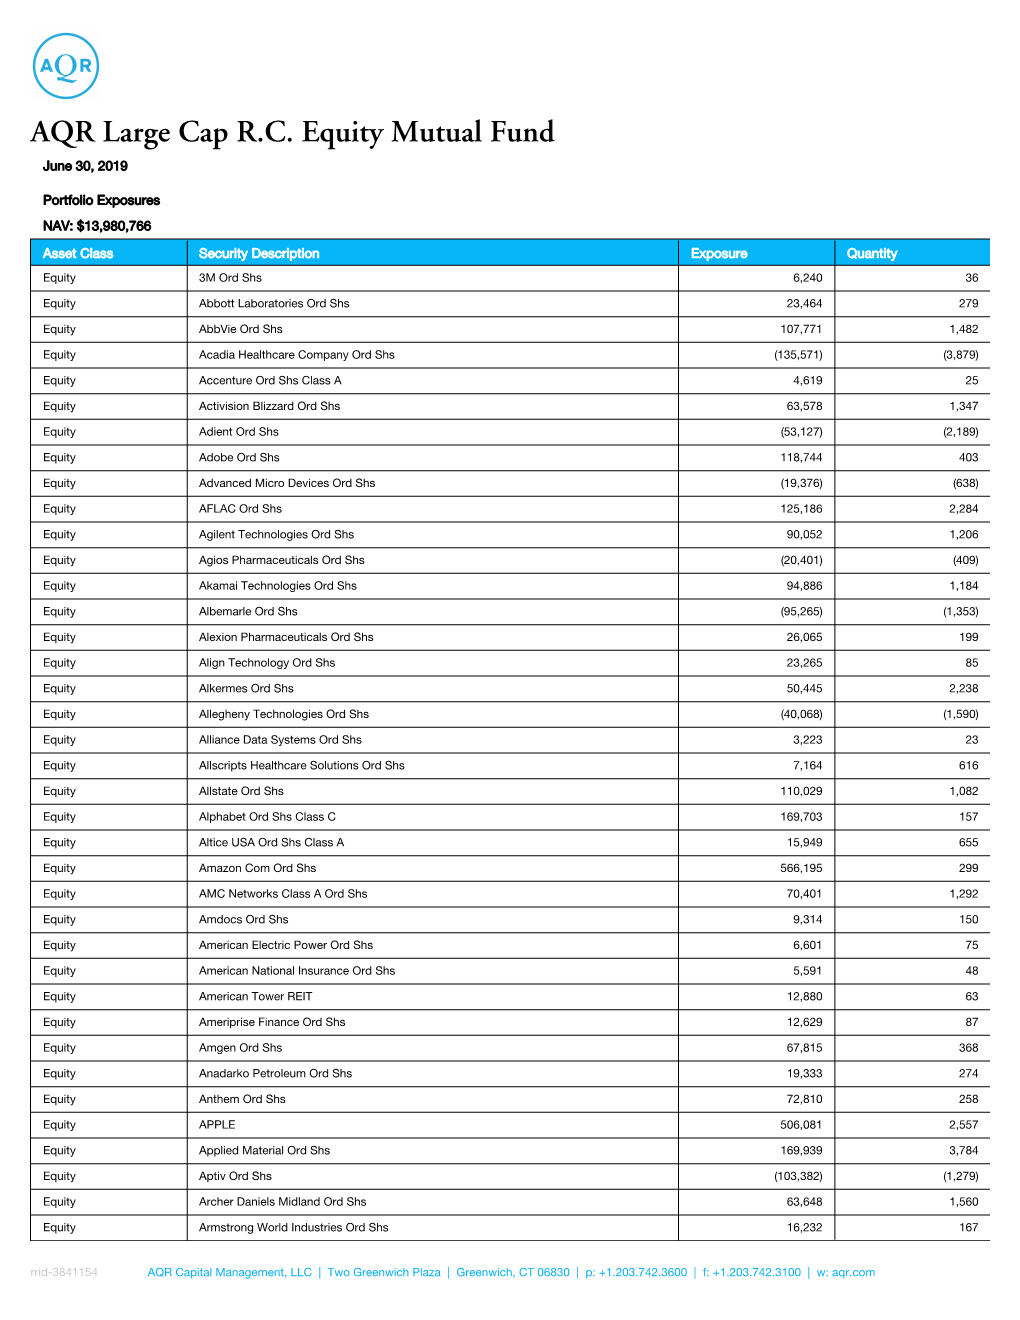 AQR Large Cap R.C. Equity Mutual Fund June 30, 2019